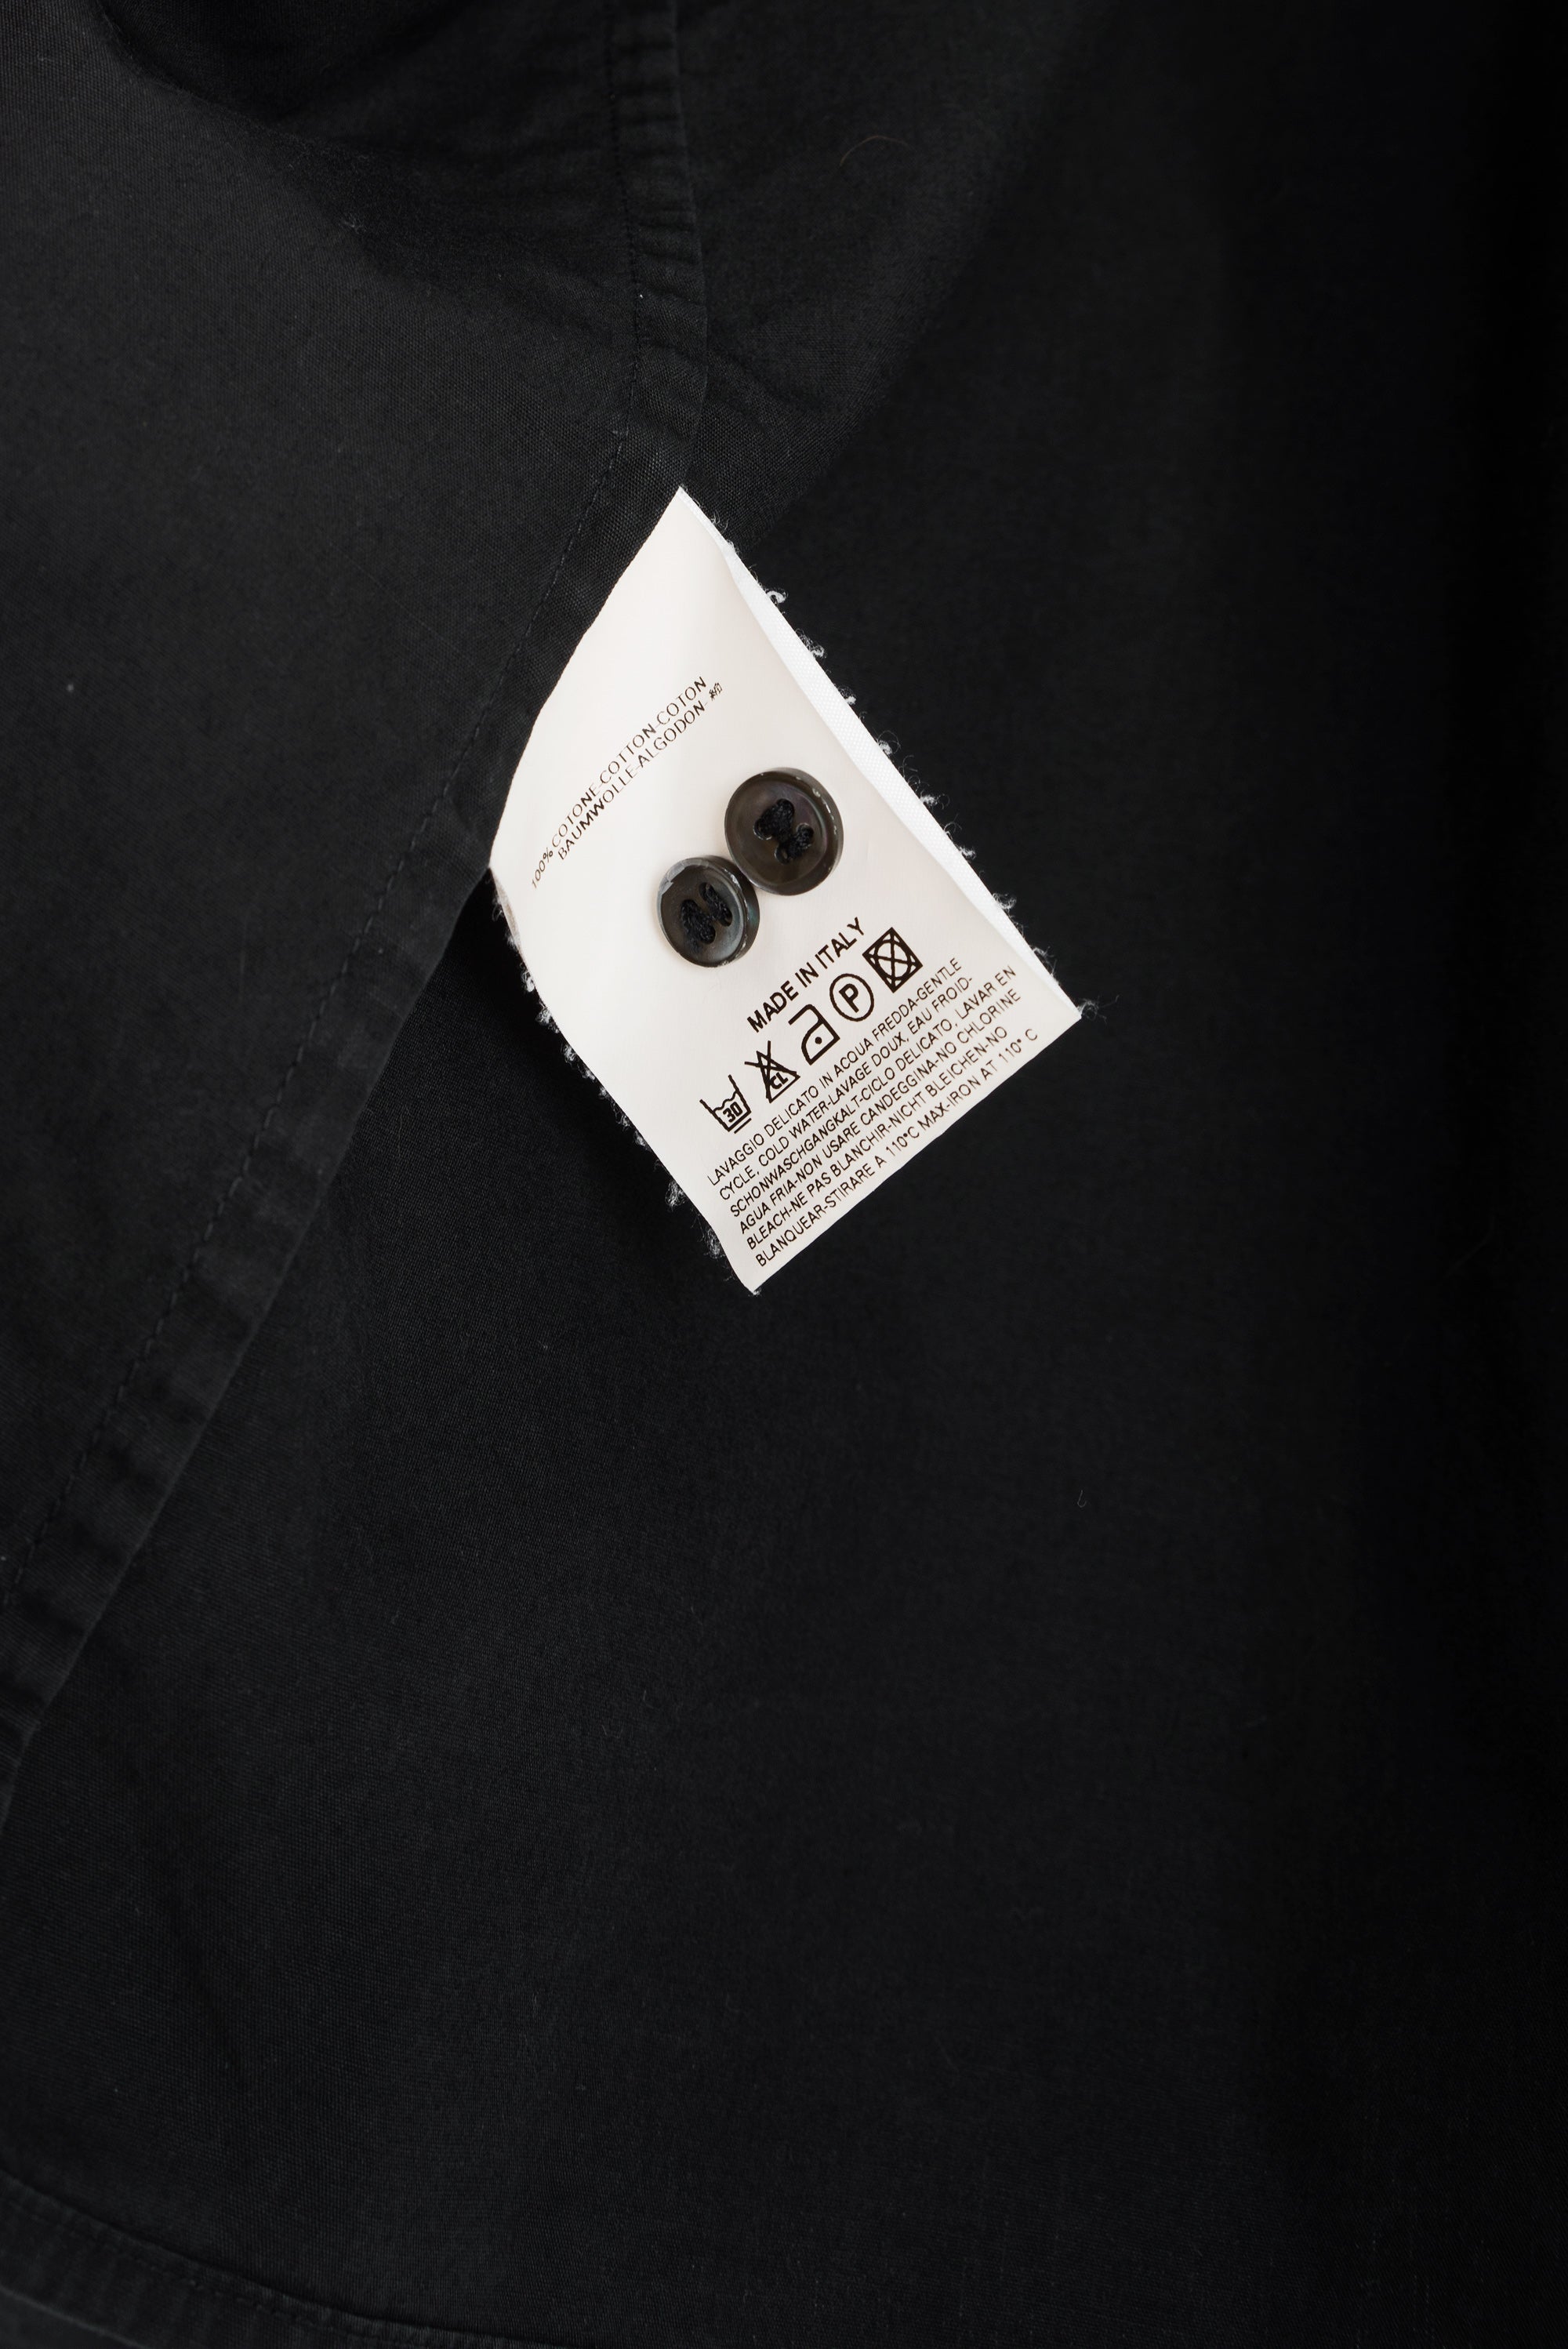 2002 A/W BLACK COTTON SHIRT WITH WIDE FRONT PLACKET